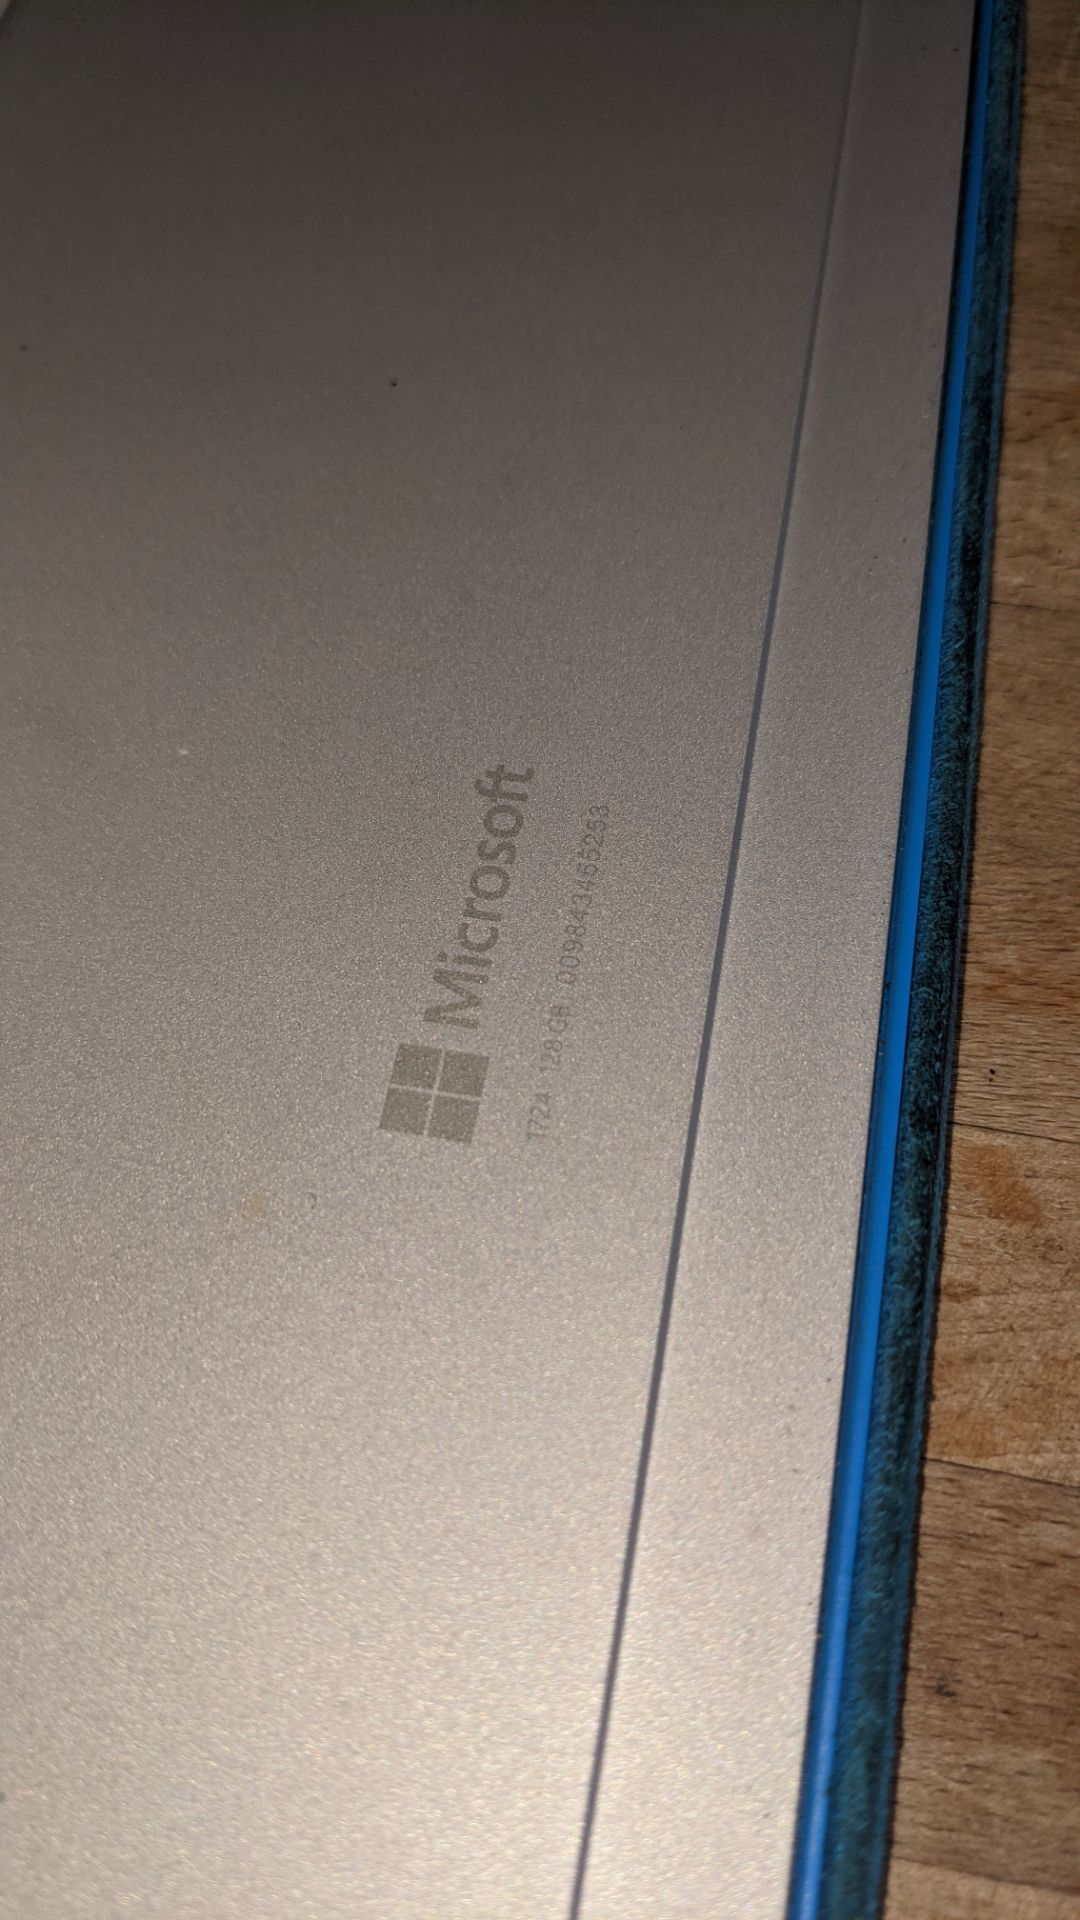 Microsoft Surface Pro 4 notebook computer, Intel Core i5-6300u@2.4GHz, 4Gb RAM, 128Gb SSD, with brig - Image 9 of 17